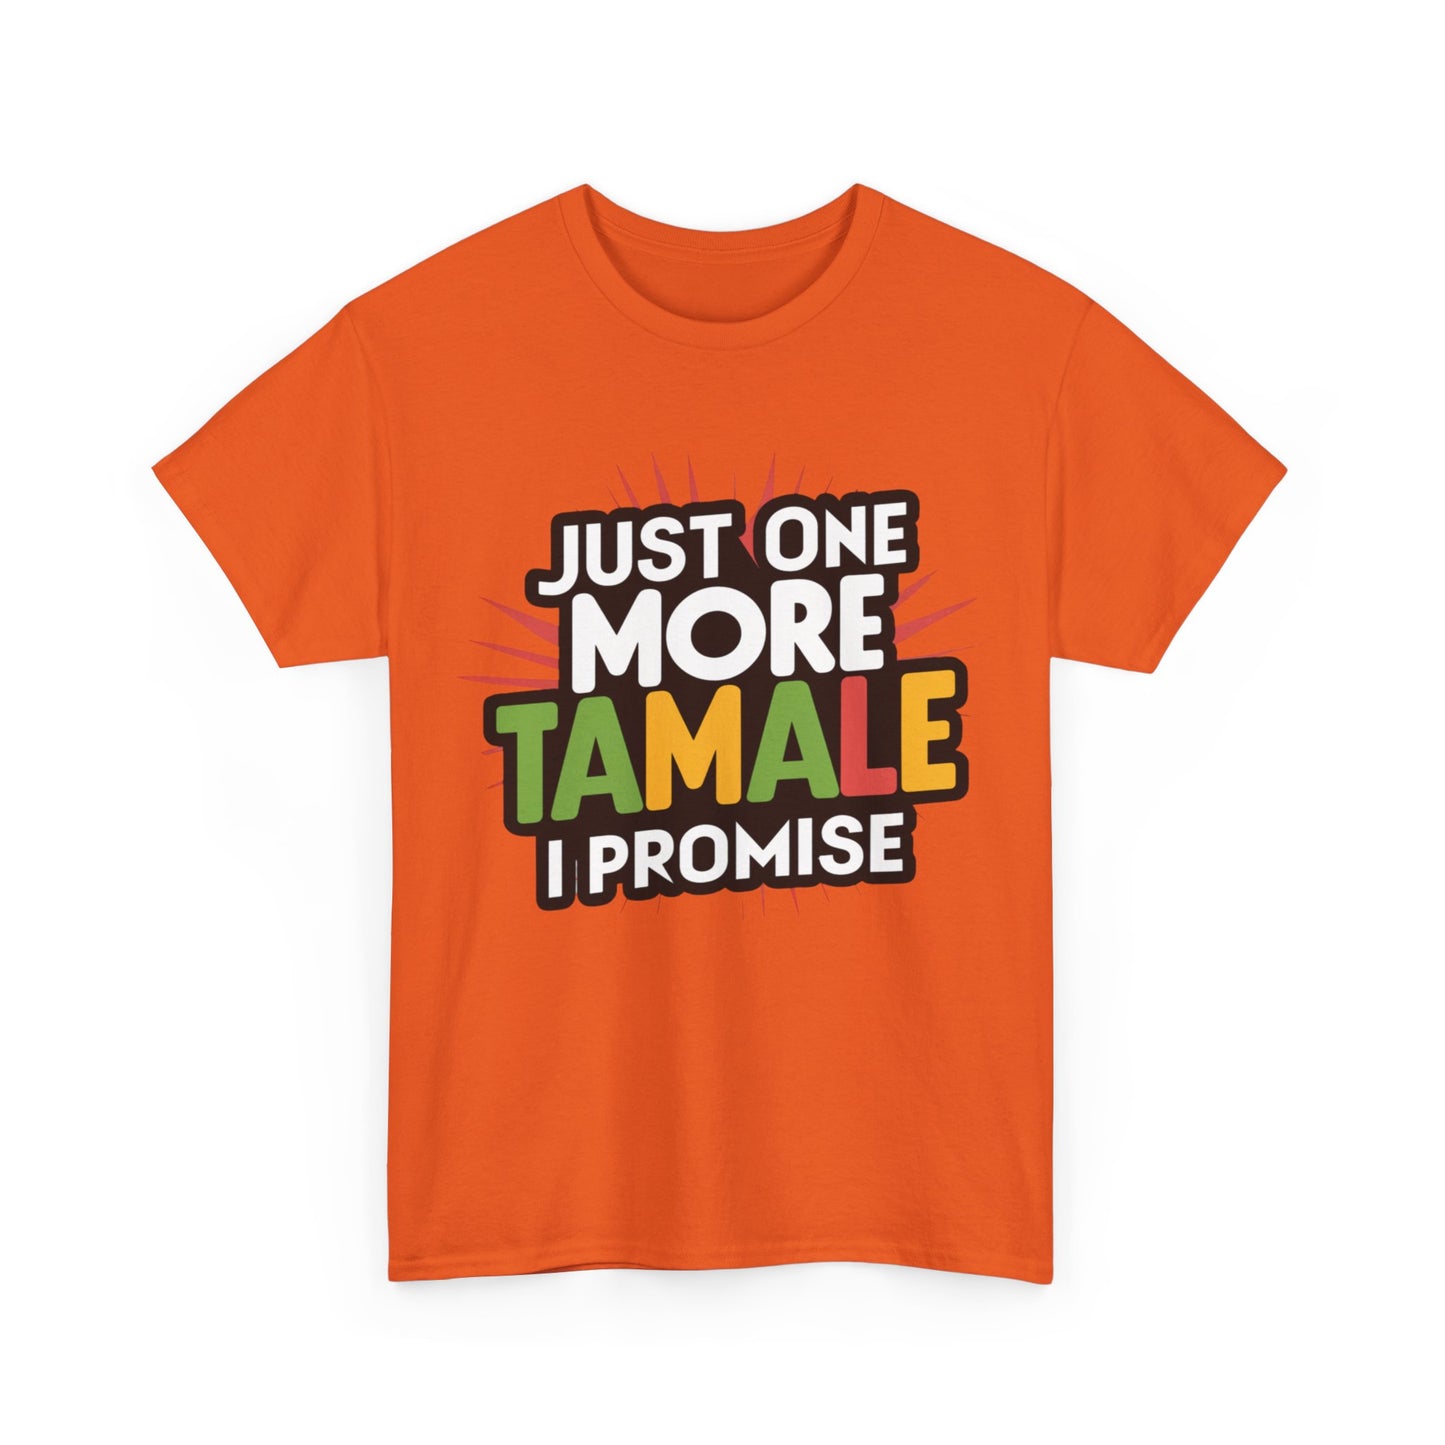 Just One More Tamale I Promise Mexican Food Graphic Unisex Heavy Cotton Tee Cotton Funny Humorous Graphic Soft Premium Unisex Men Women Orange T-shirt Birthday Gift-30